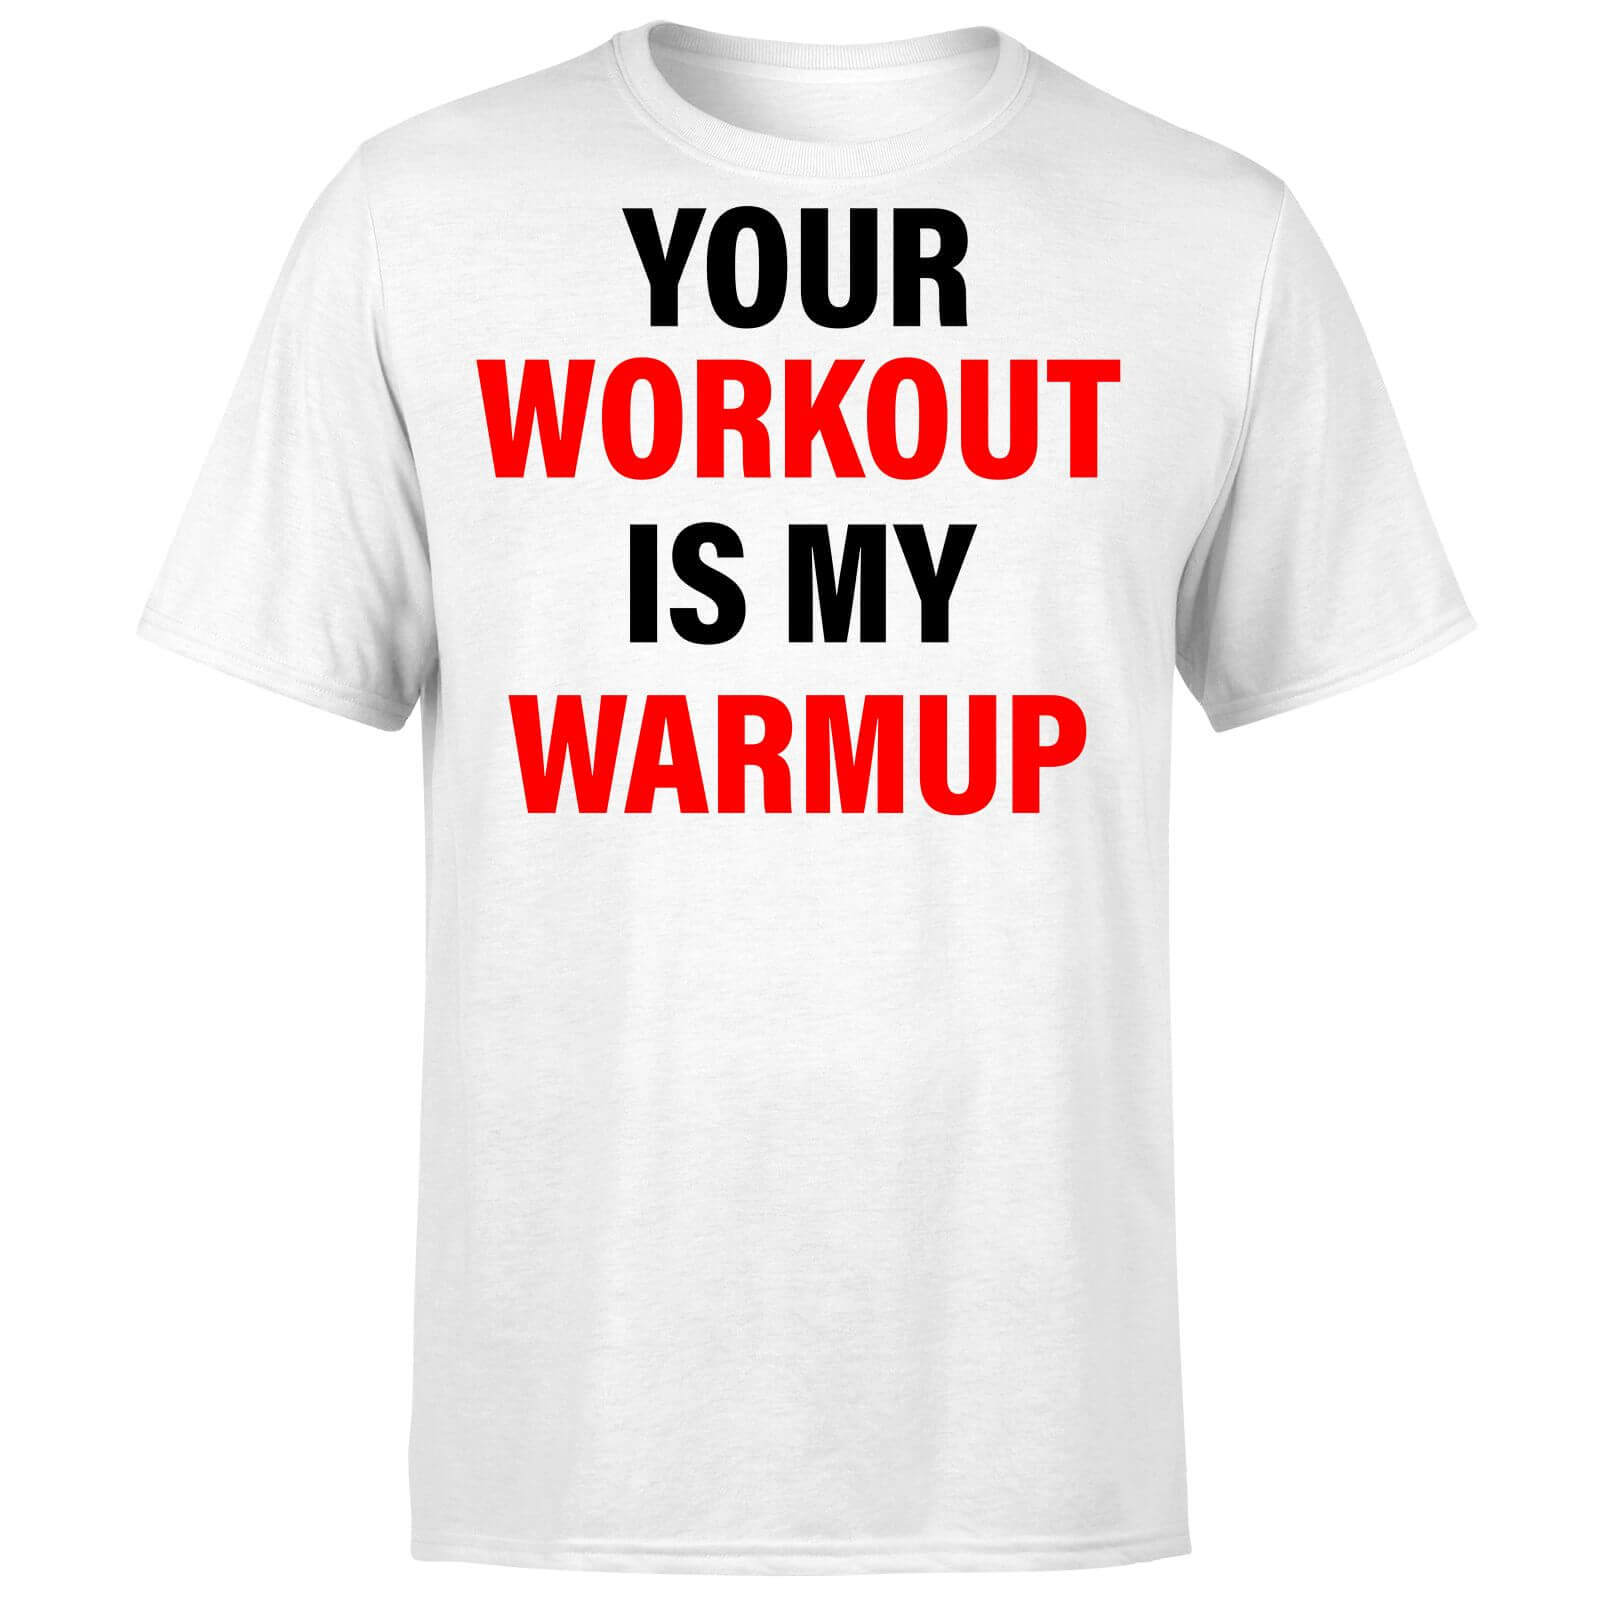 Your Workout is my Warmup T-Shirt - White - L - White